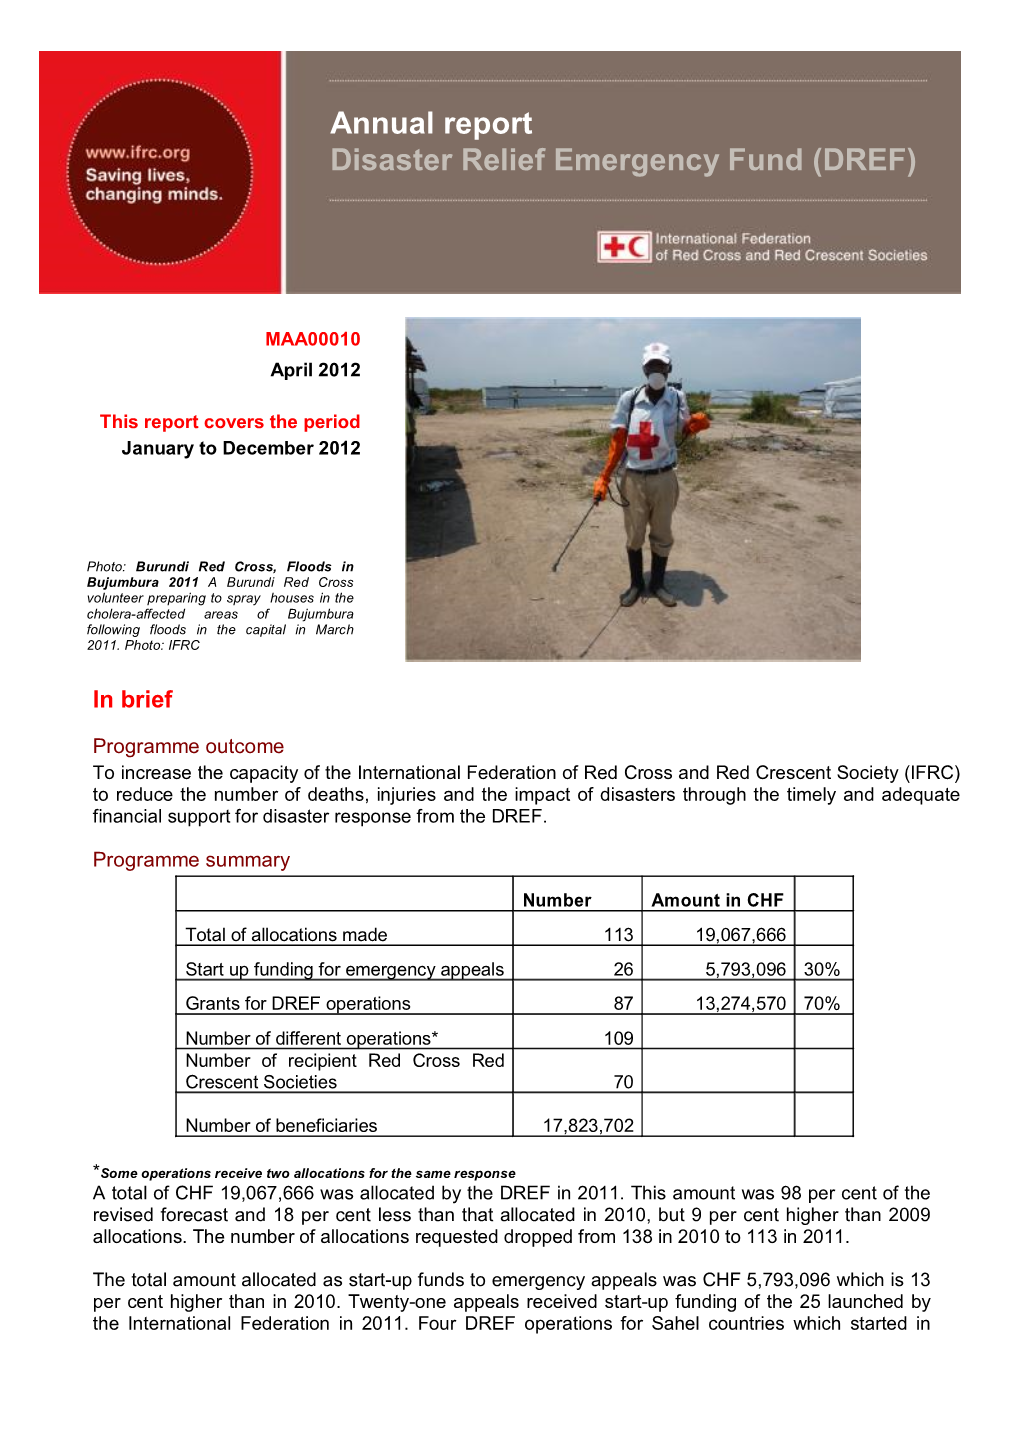 Annual Report Disaster Relief Emergency Fund (DREF)